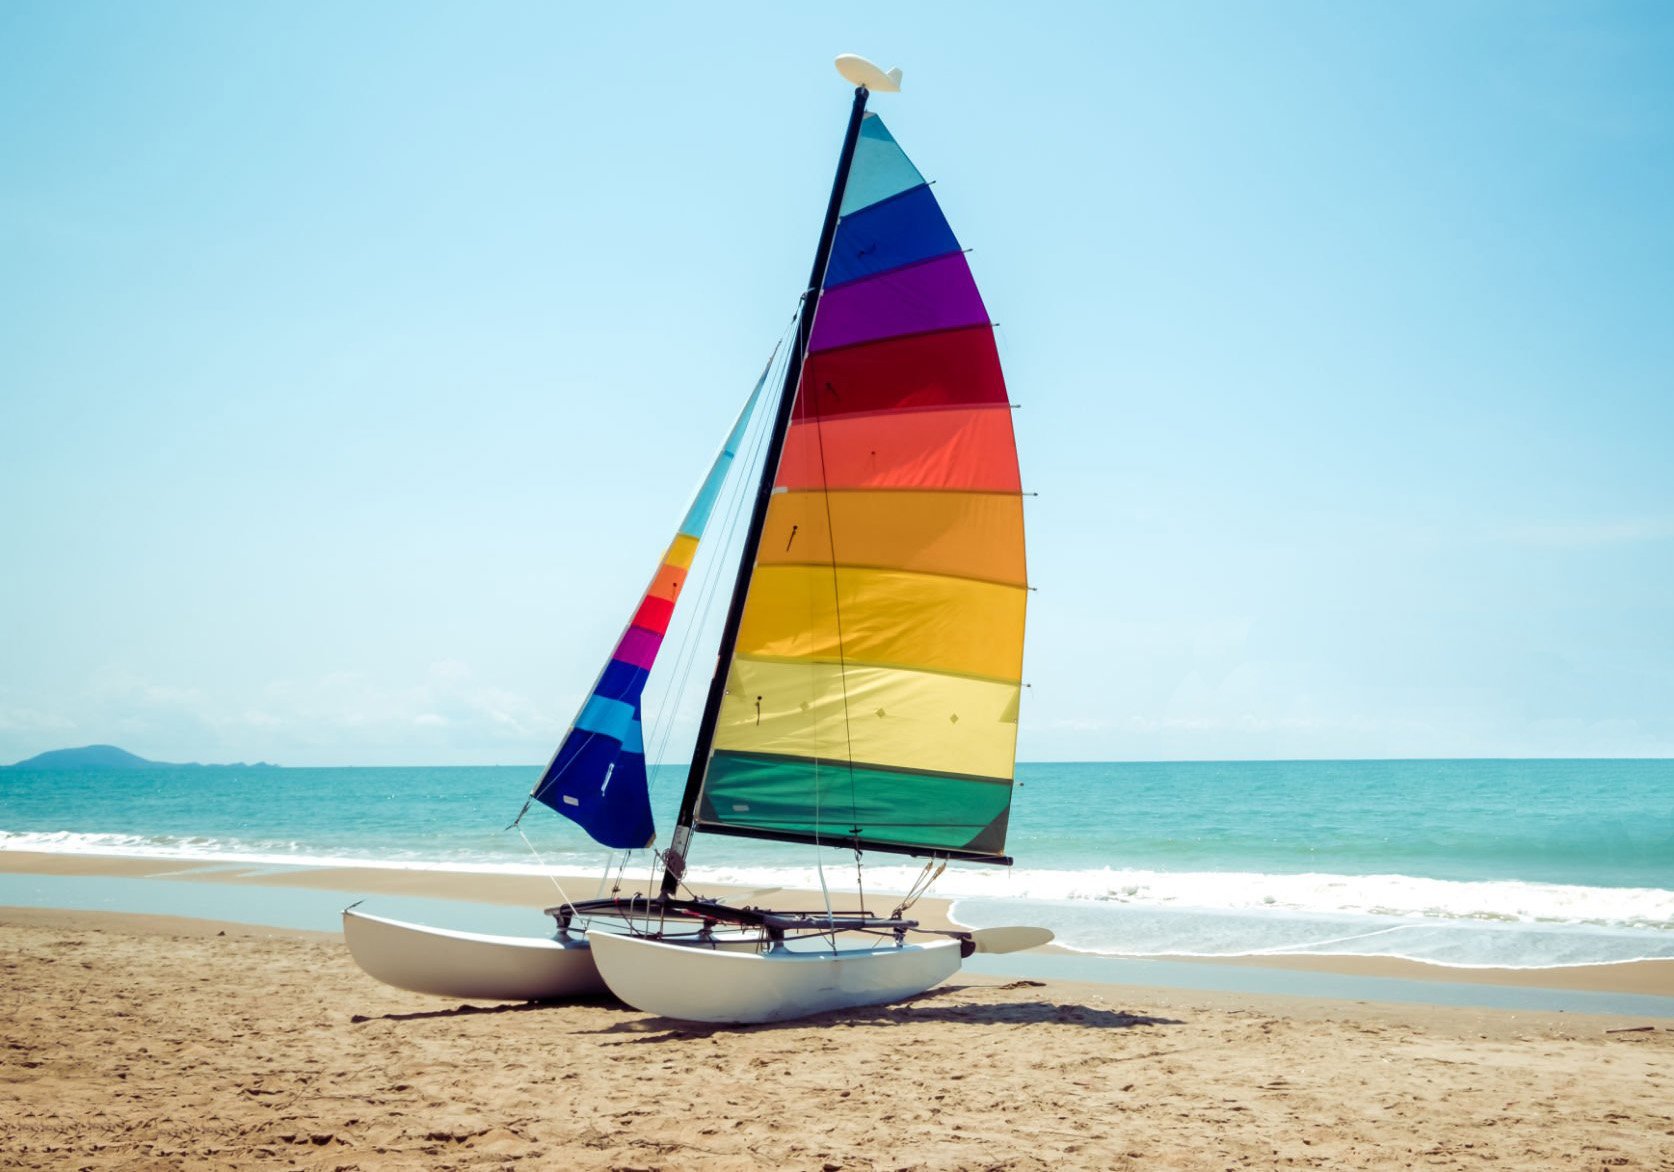 Hobie Cat on a beach in the sunshine